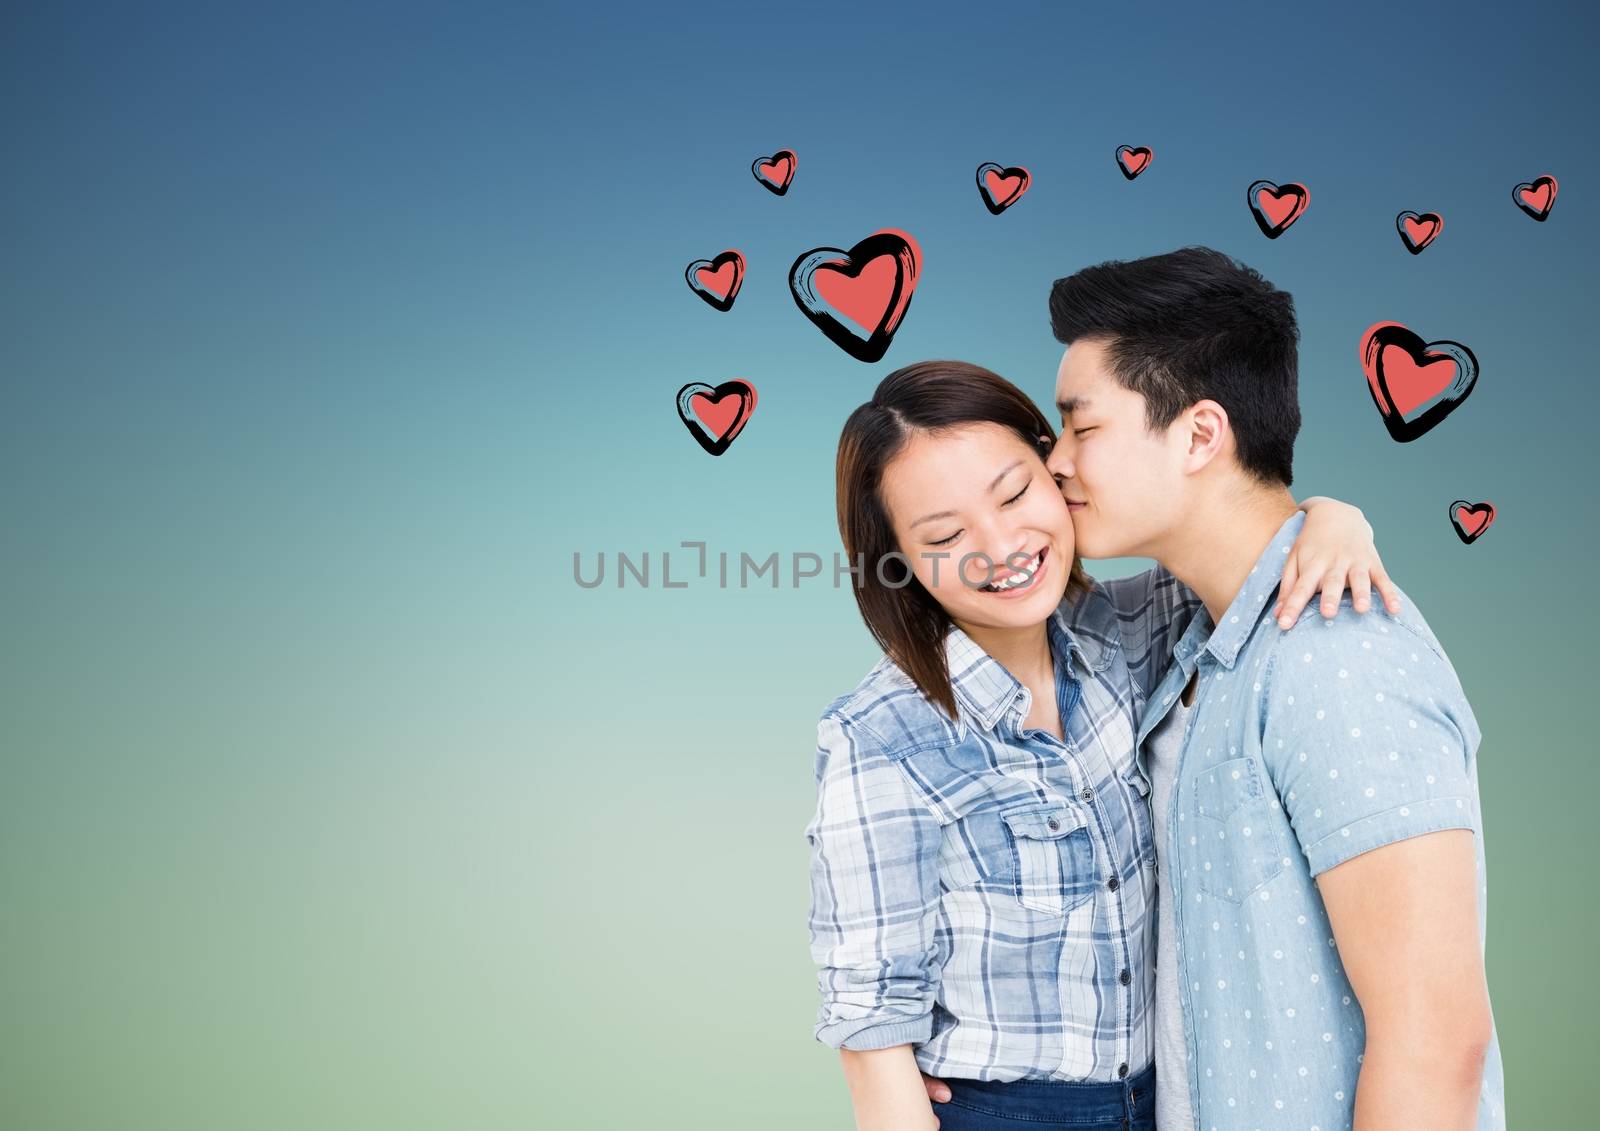 Romantic couple kissing against digitally generated background